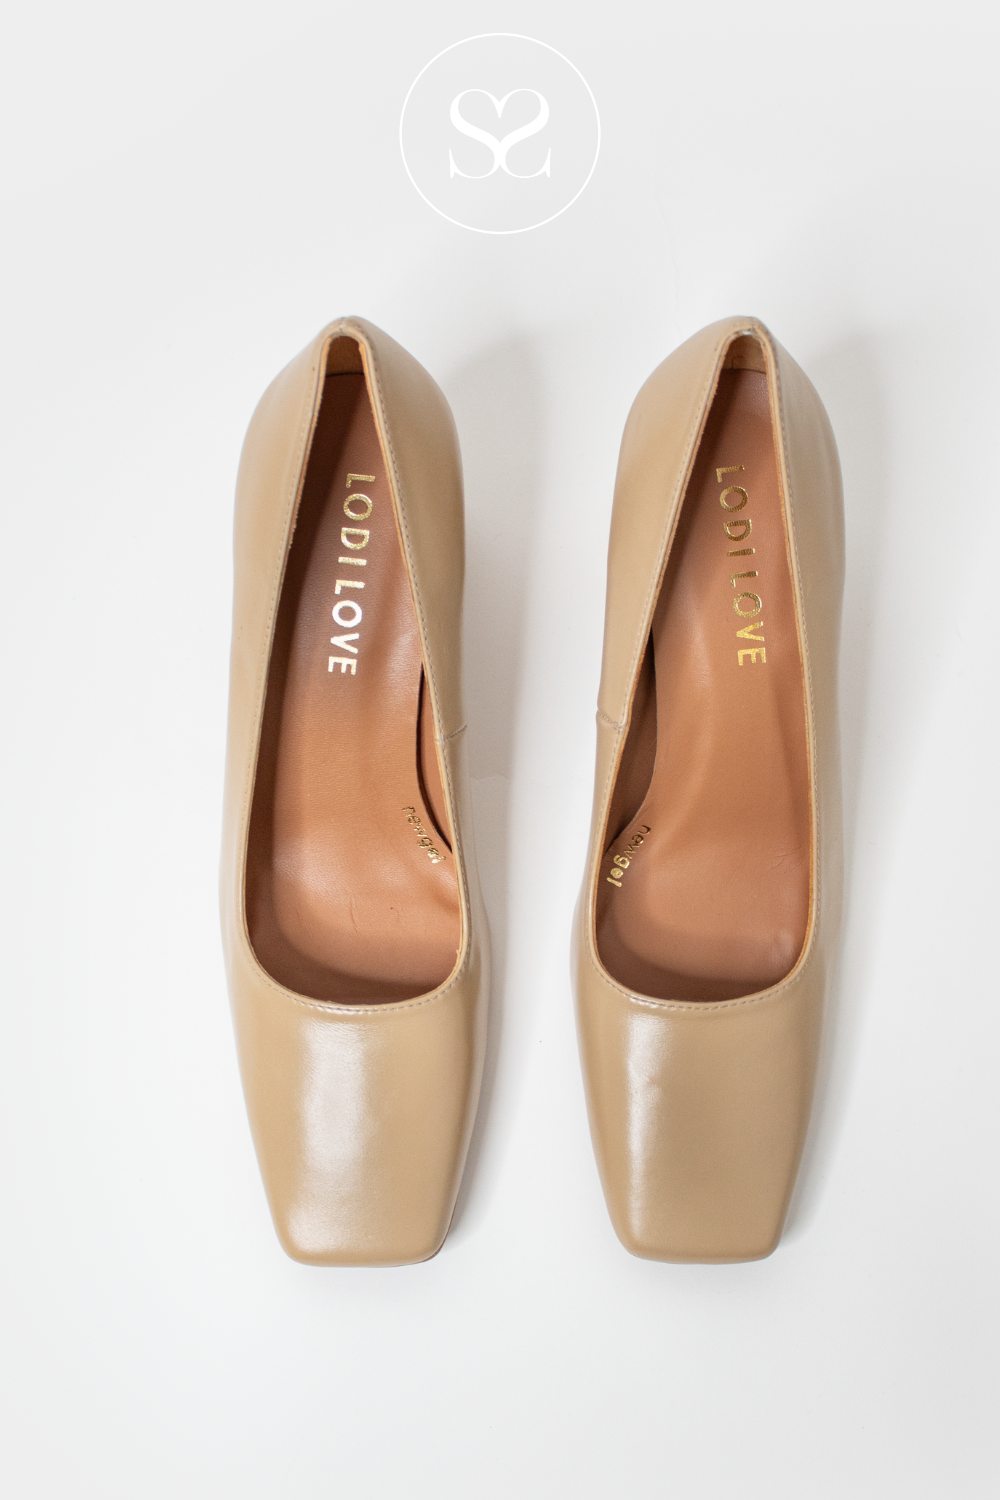 ELEGANT LODI HEELS IN CAMEL LEATHER WITH SQUARE TOE